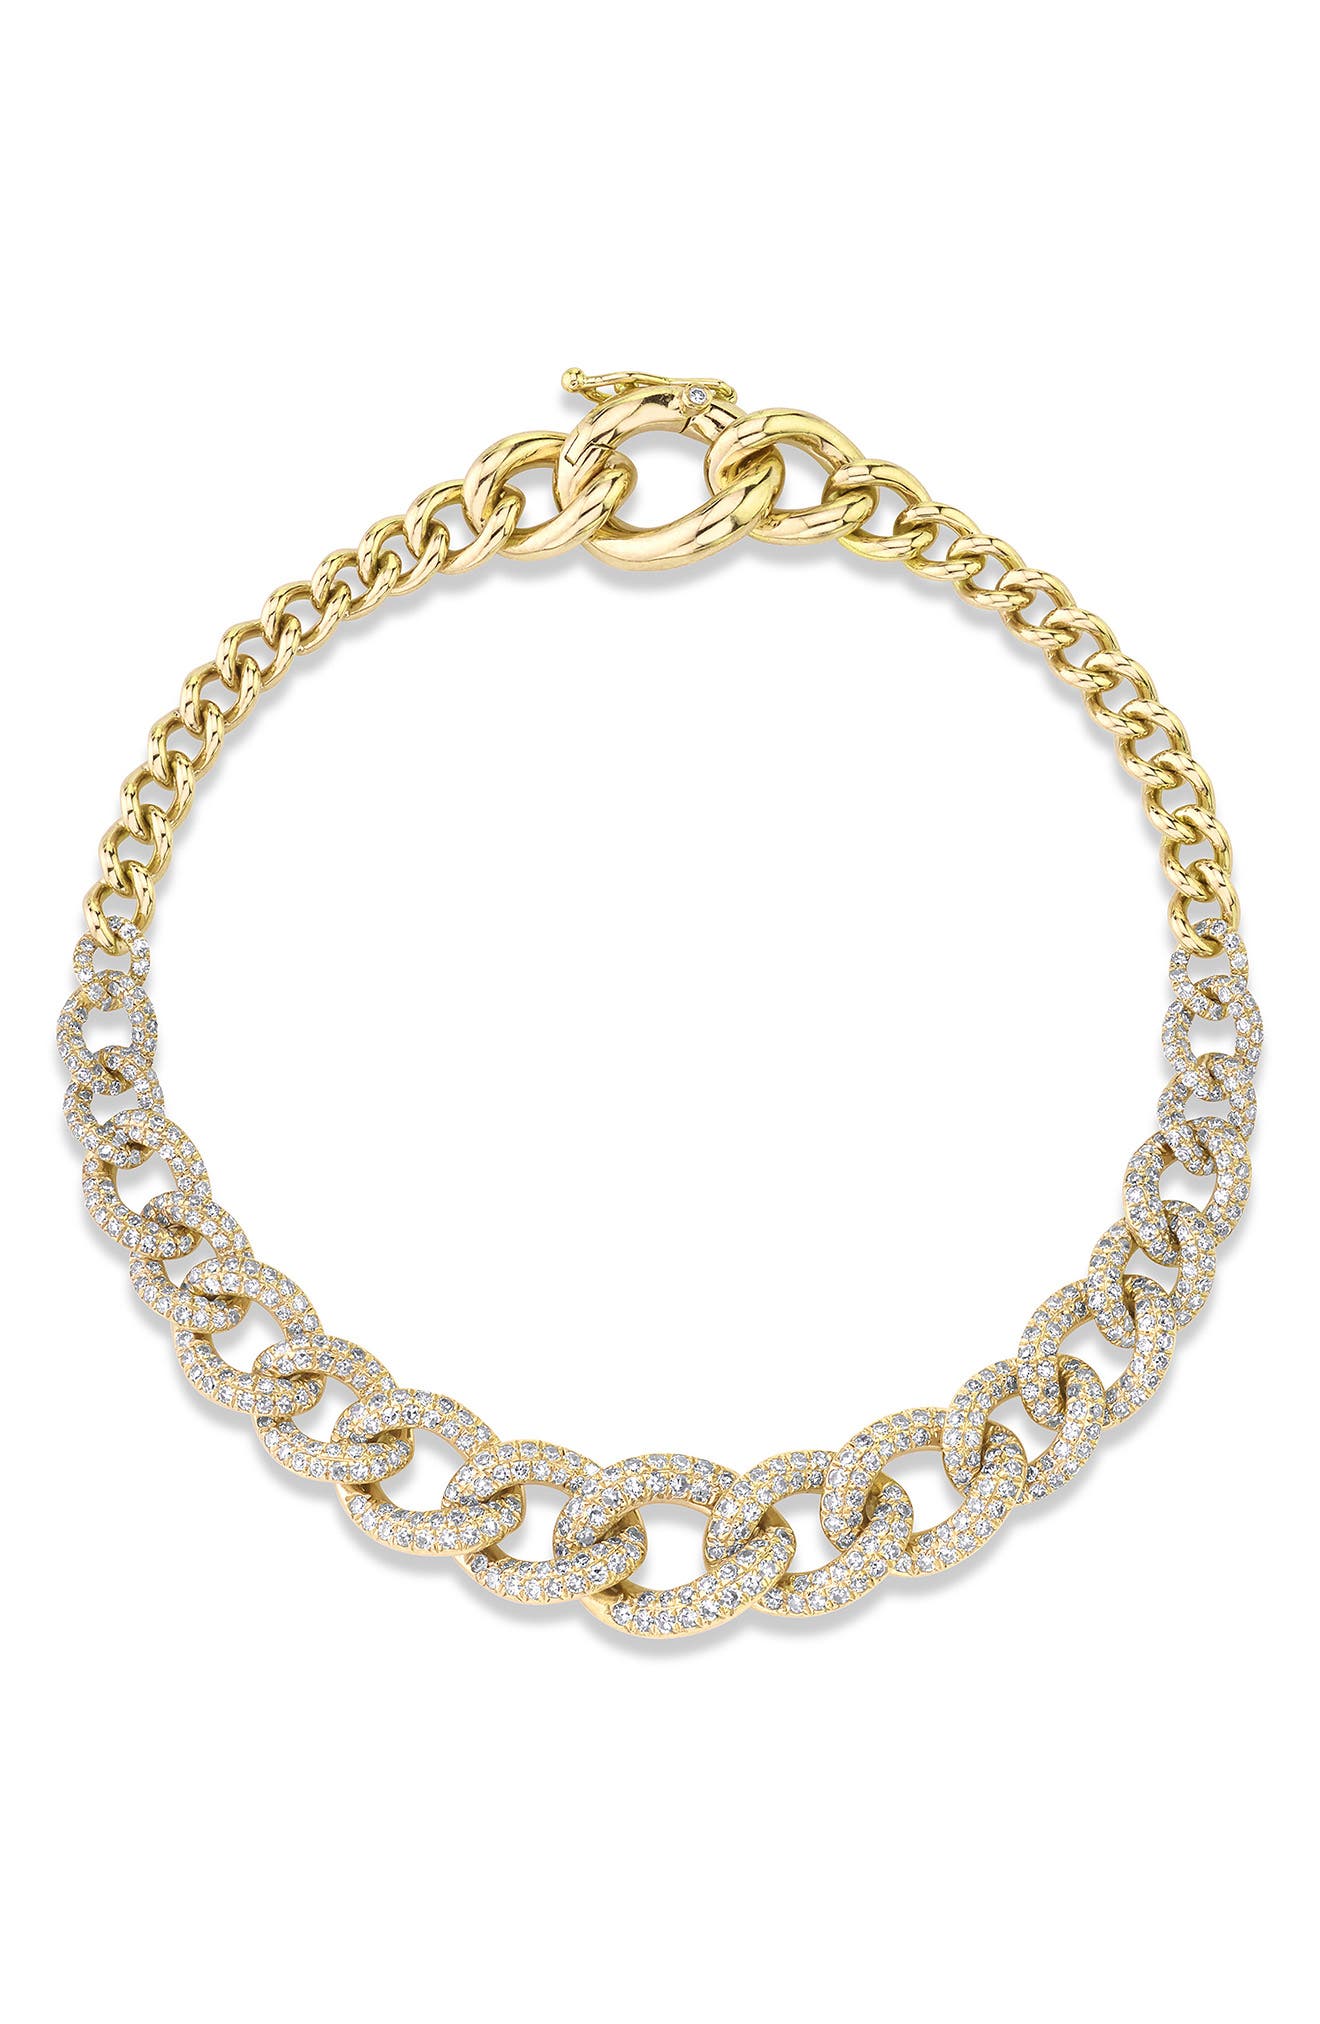 SHAY Pave Diamond Link Bracelet in Yellow Gold at Nordstrom, Size 6.5 Us